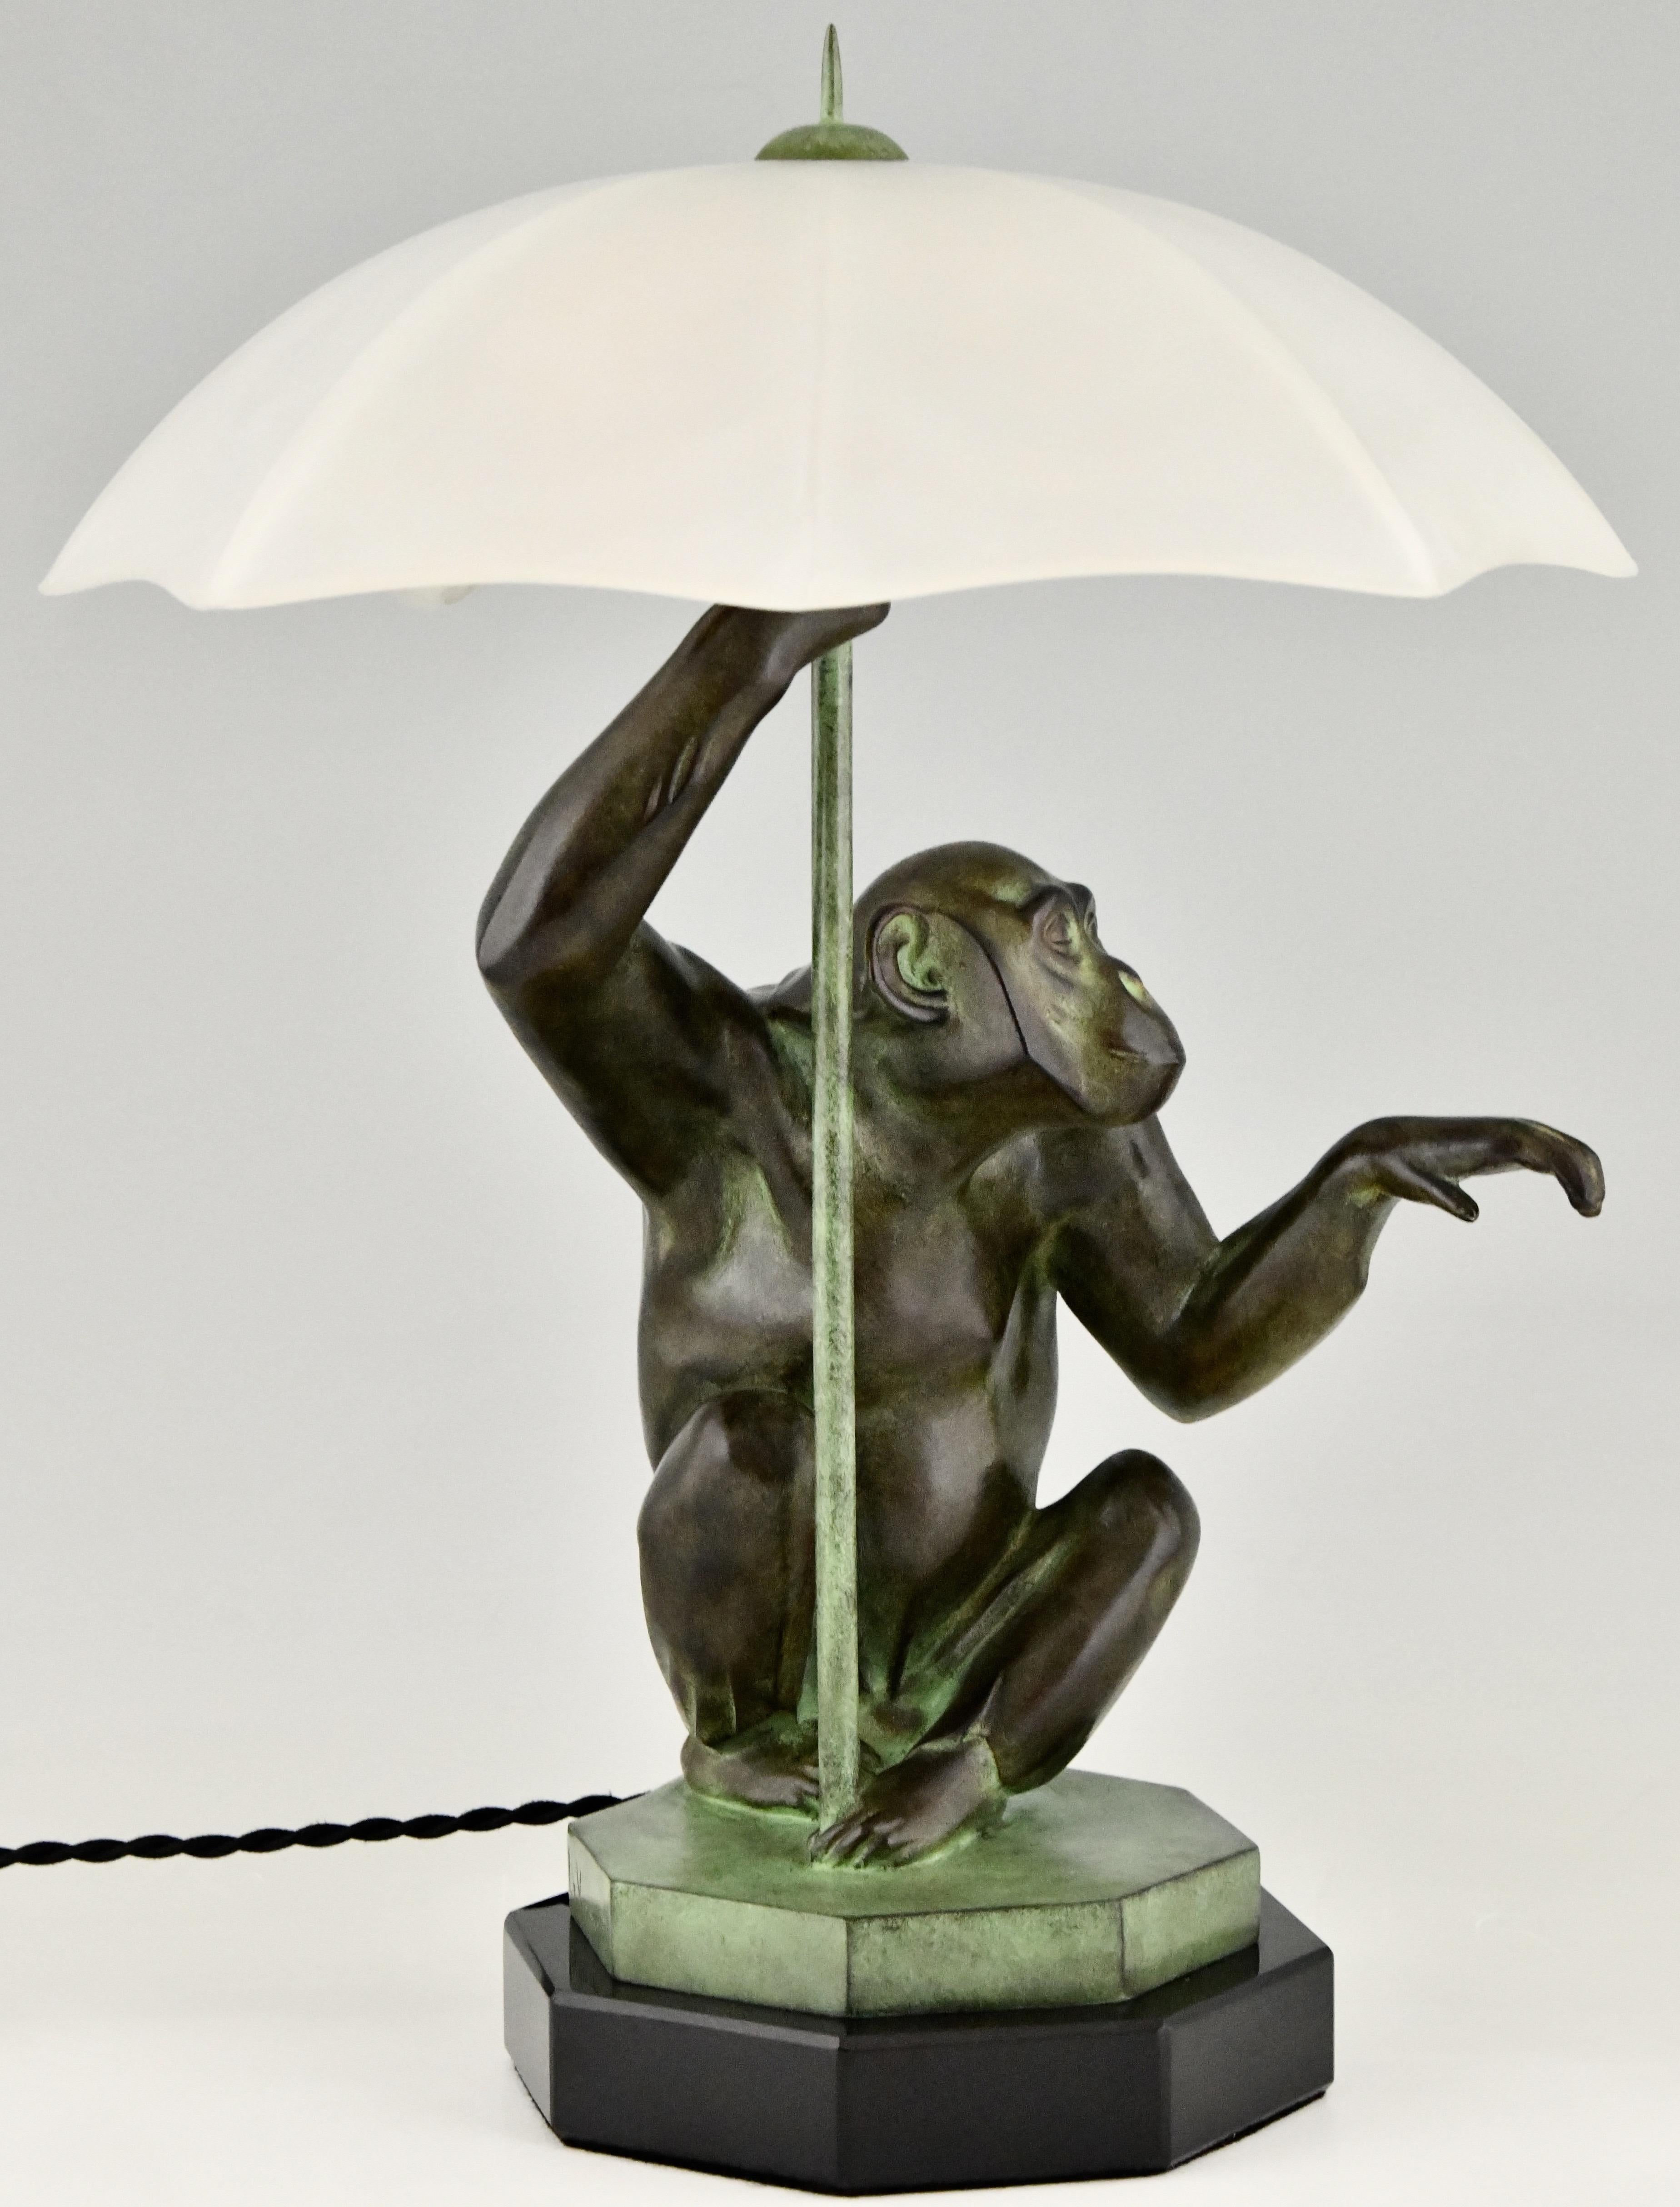 Metal Art Deco Style Table Lamp Monkey with Umbrella by Max Le Verrier France